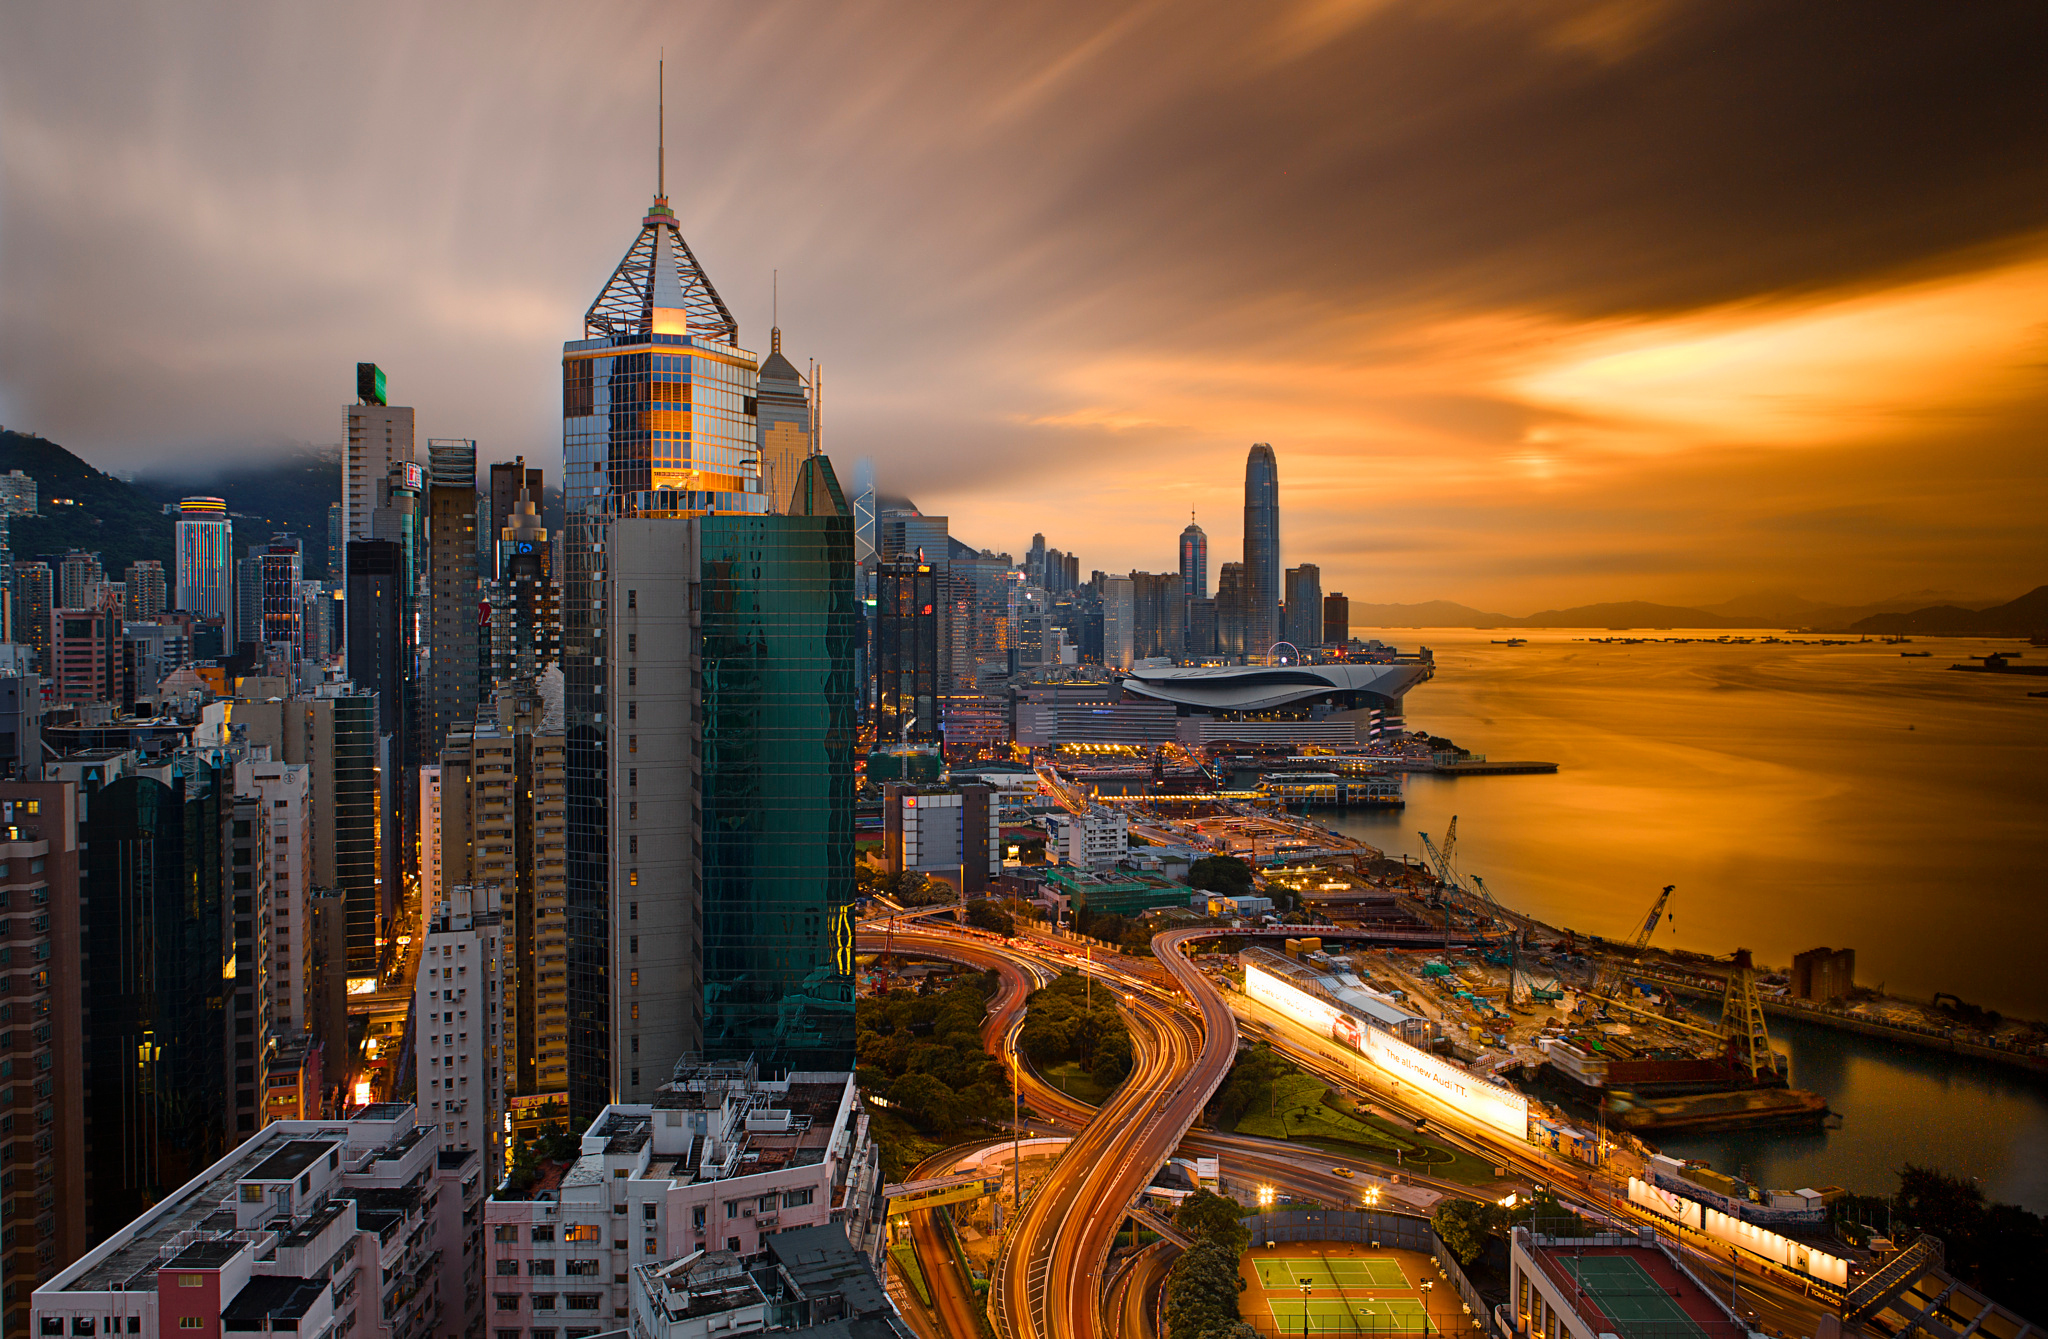 cities, man made, hong kong, architecture, building, china, city, light, megapolis, sunset, victoria harbour